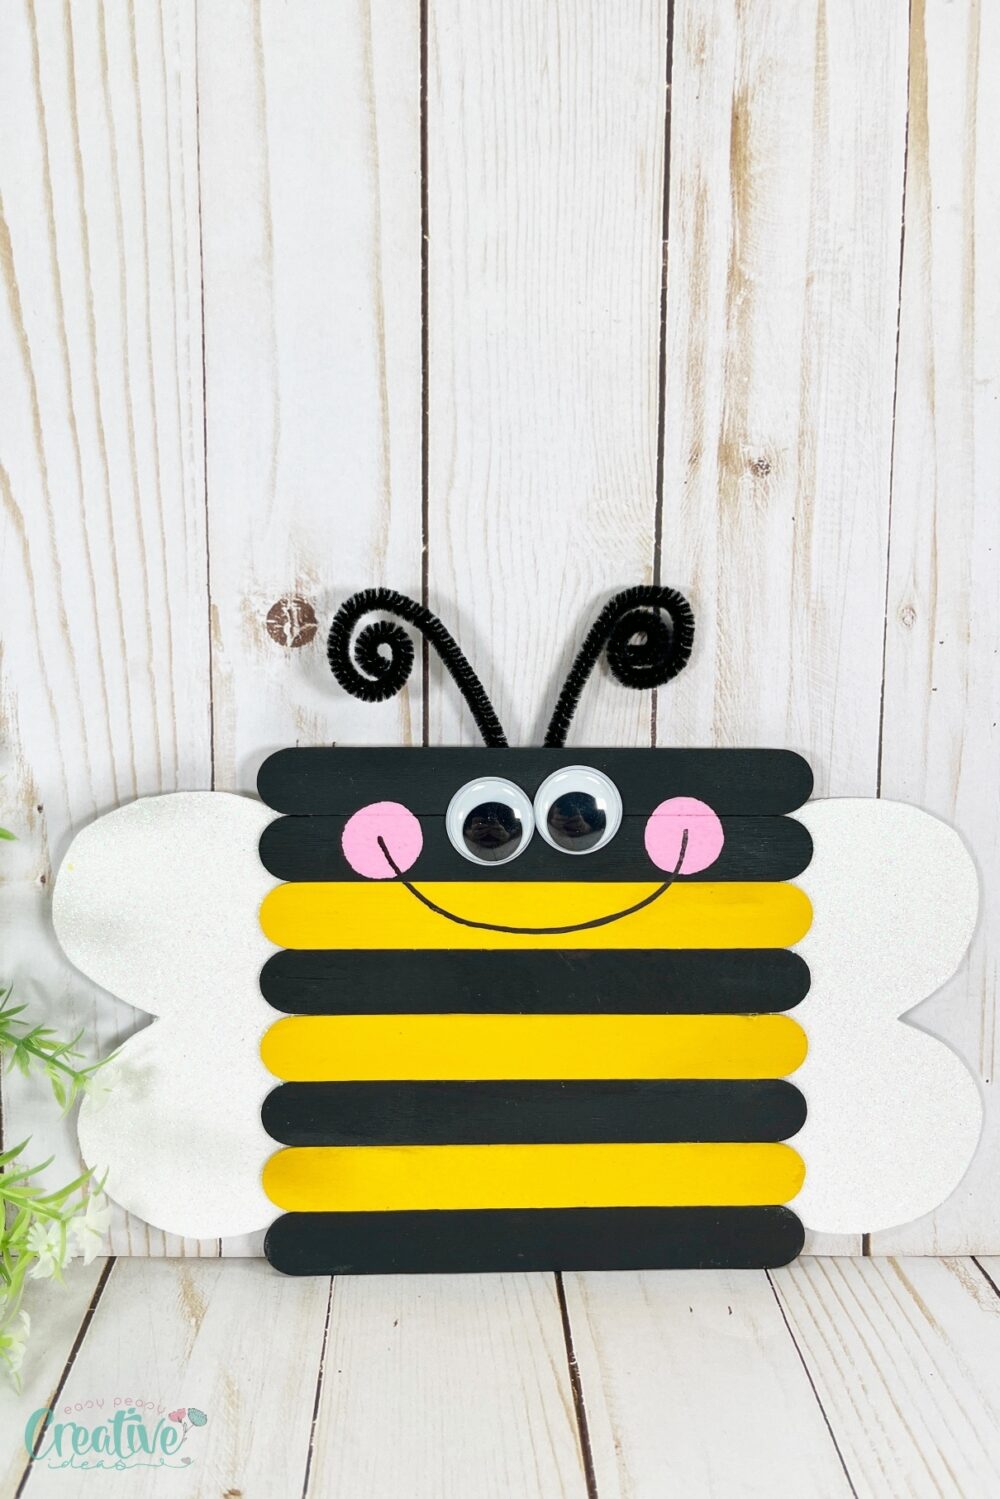 Get creative with this simple bee craft! Suitable for both children and adults, use the easy-to-follow tutorial to make cute bee decorations. Feel free to explore your imagination as you craft these delightful bees!